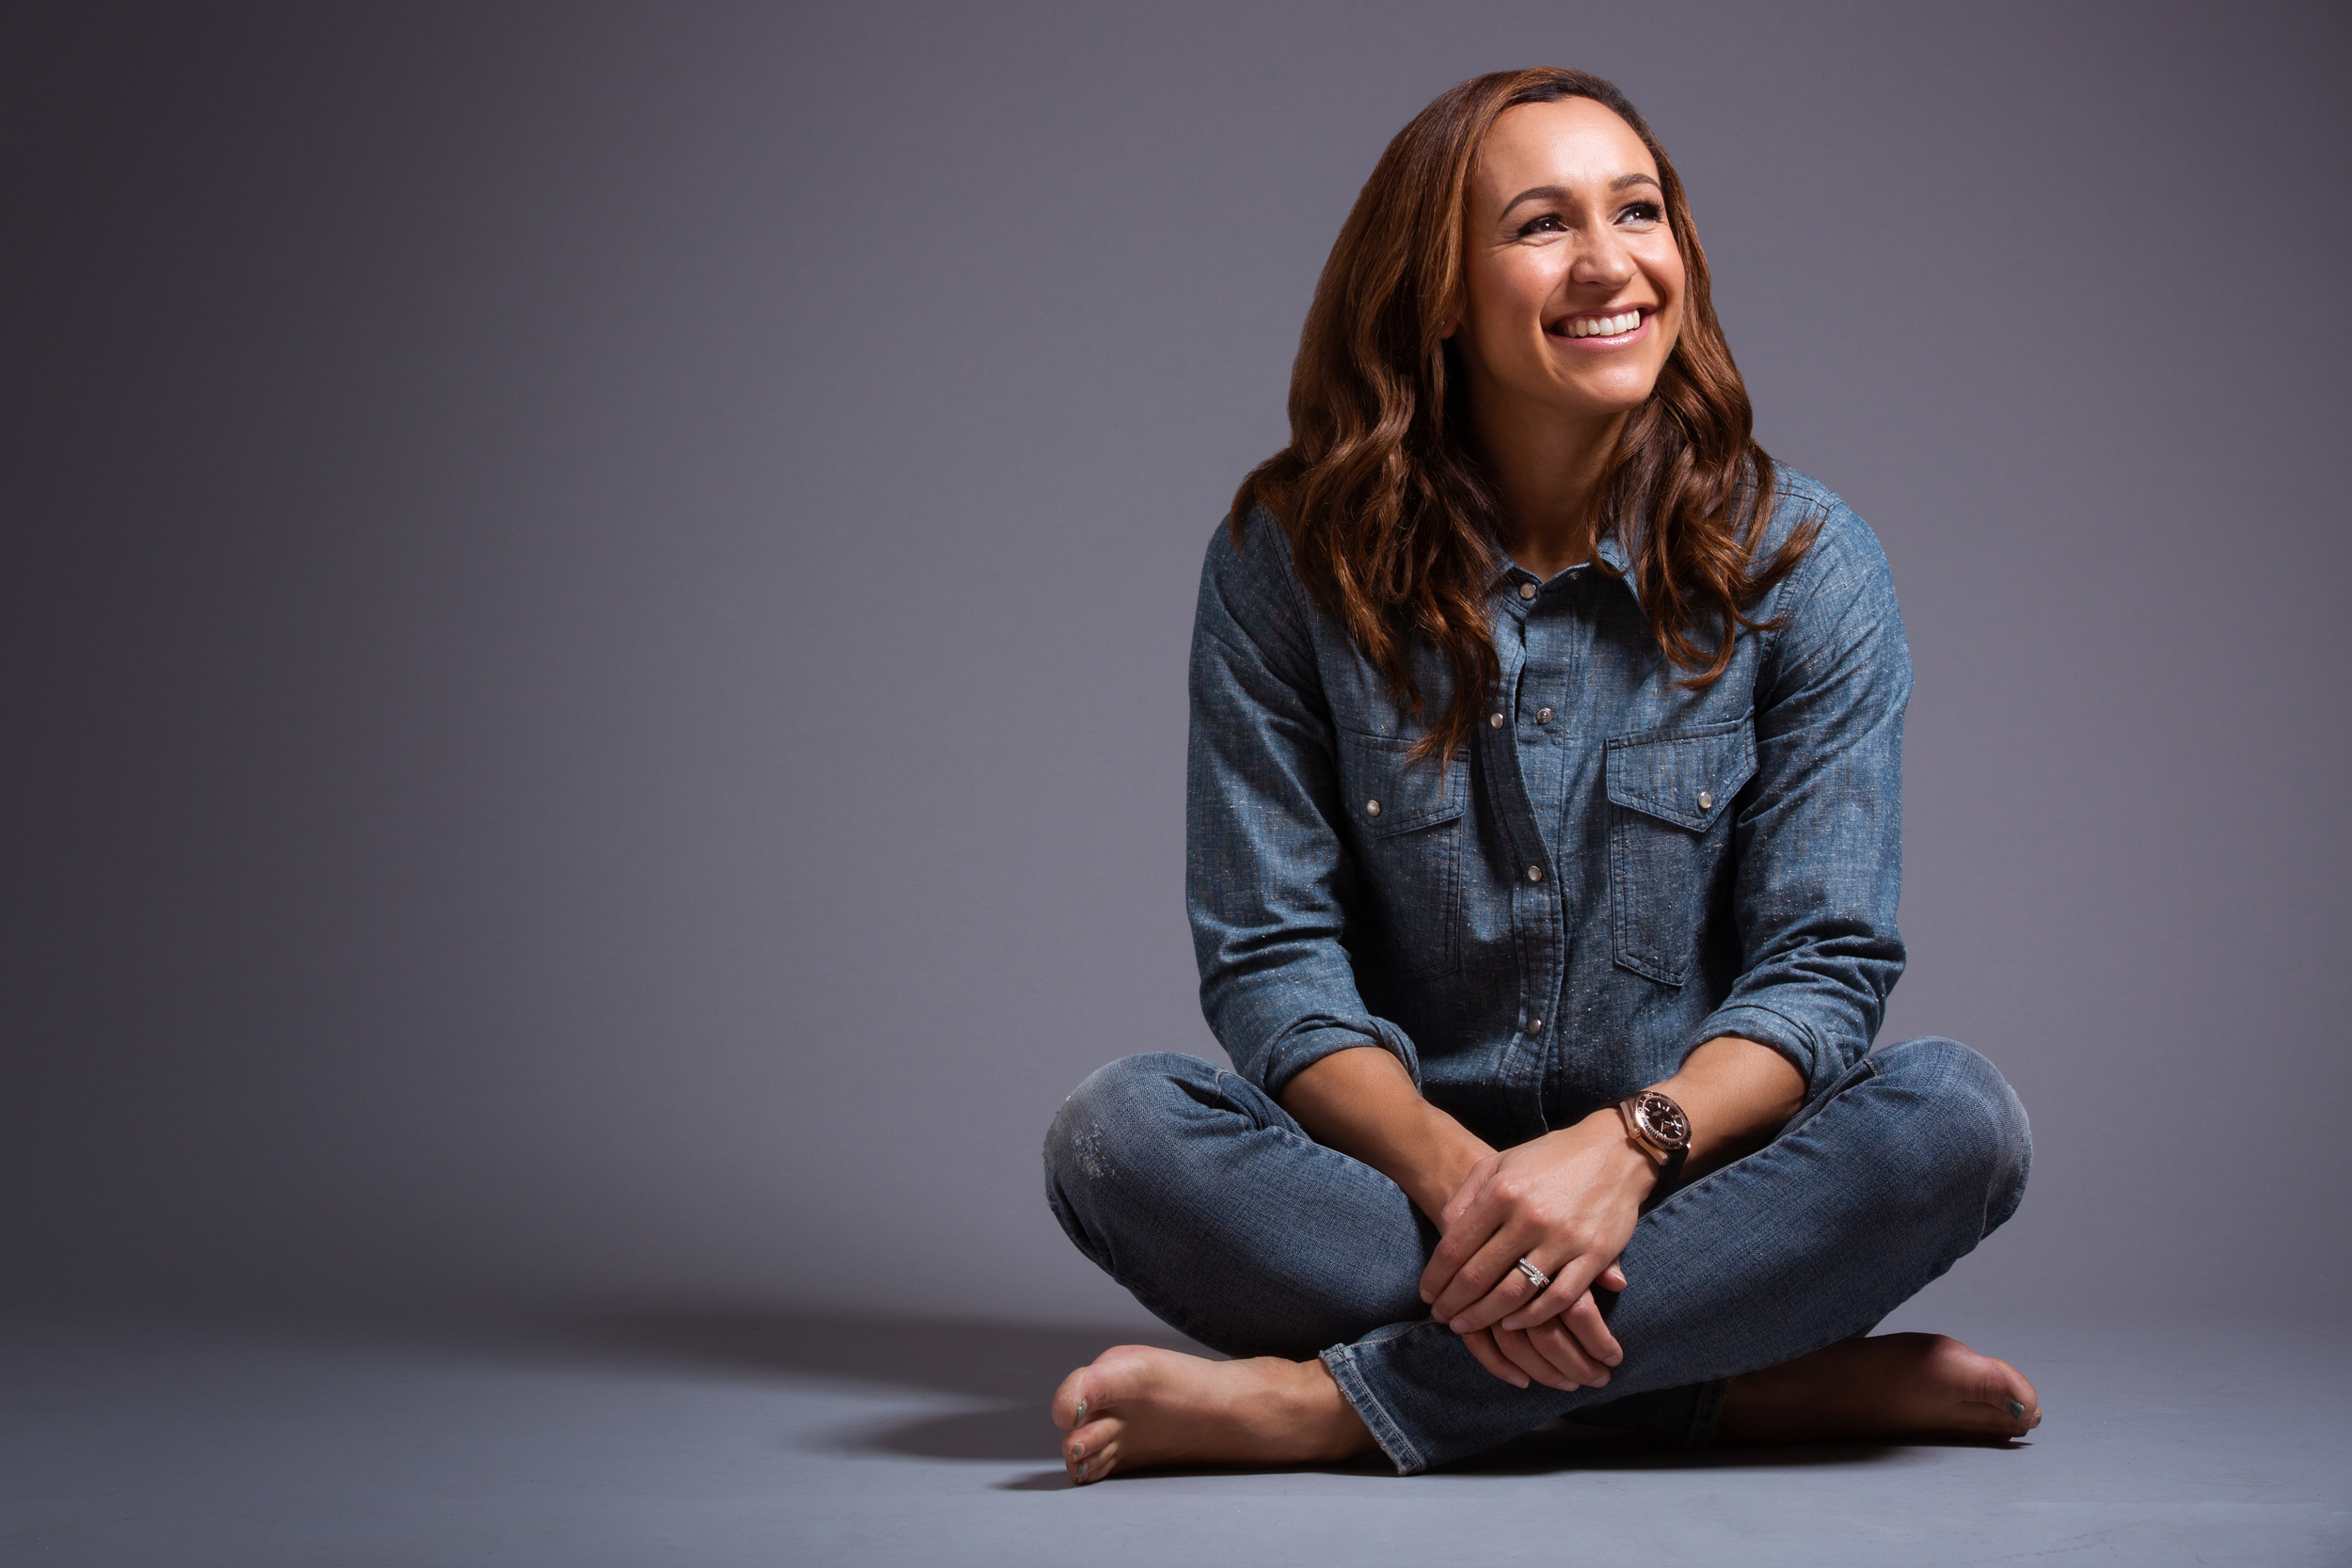  Jessica Ennis-Hill - Olympic Gold Medalist and World Champion Heptathlete.  